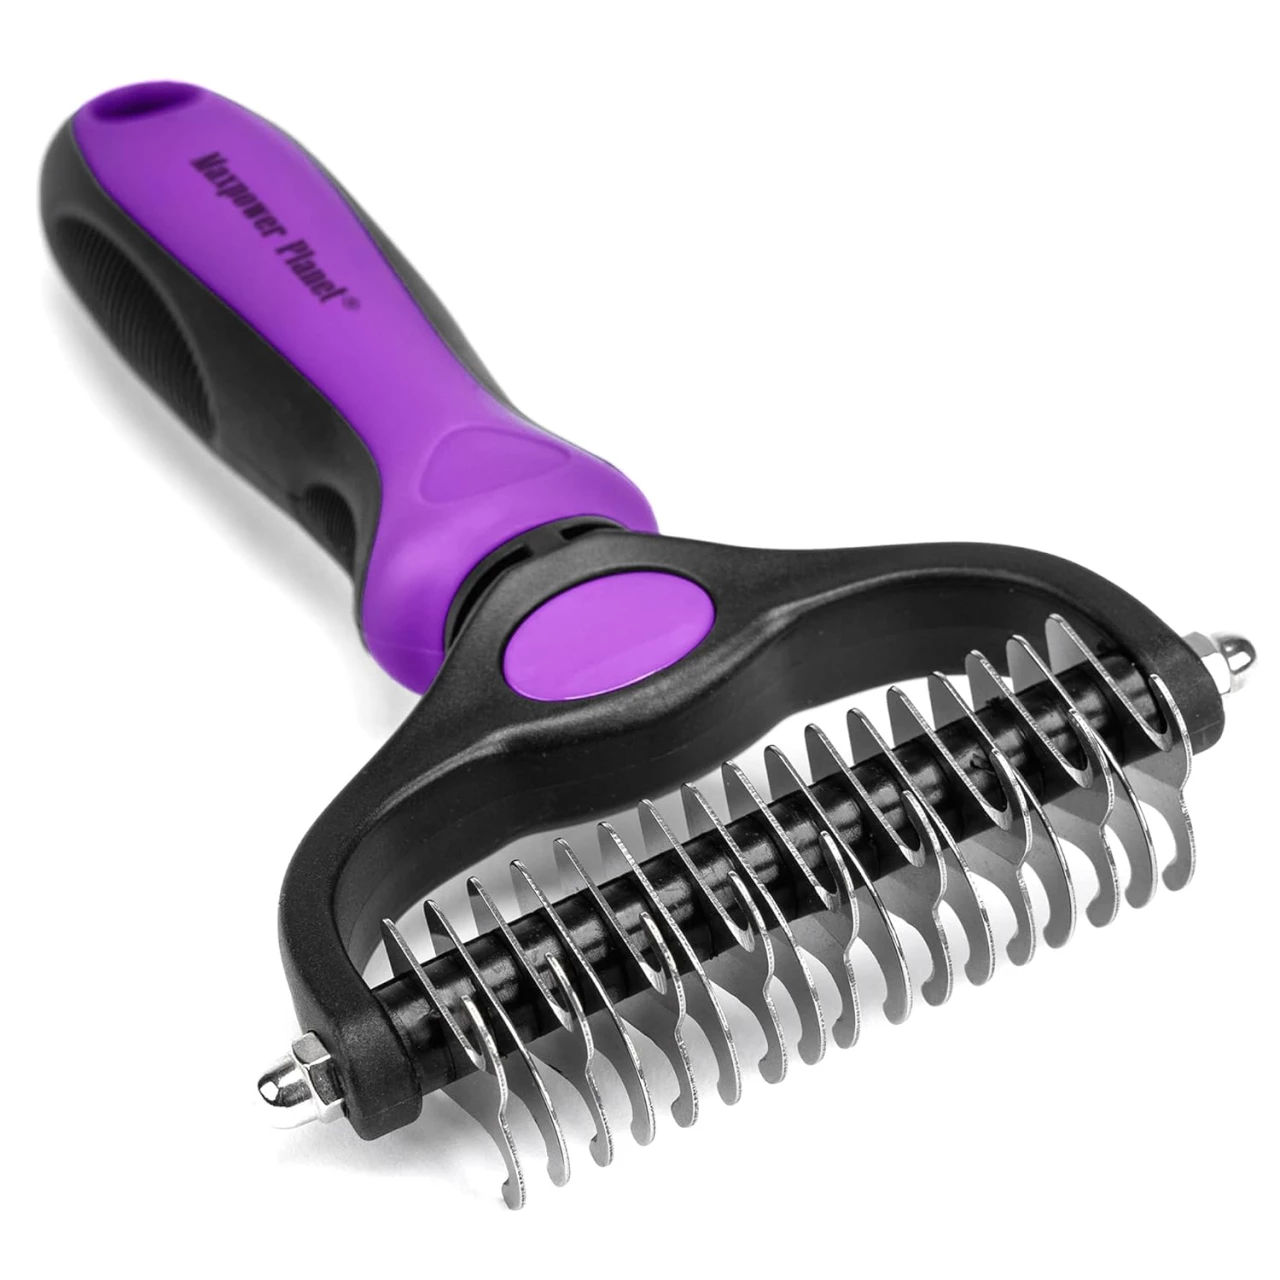 Maxpower Planet Pet Grooming Brush - Double Sided Shedding and Dematting Undercoat Rake, Dog Grooming Brush, Cat Grooming Brush, Dog Comb, Cat Brush (Purple)